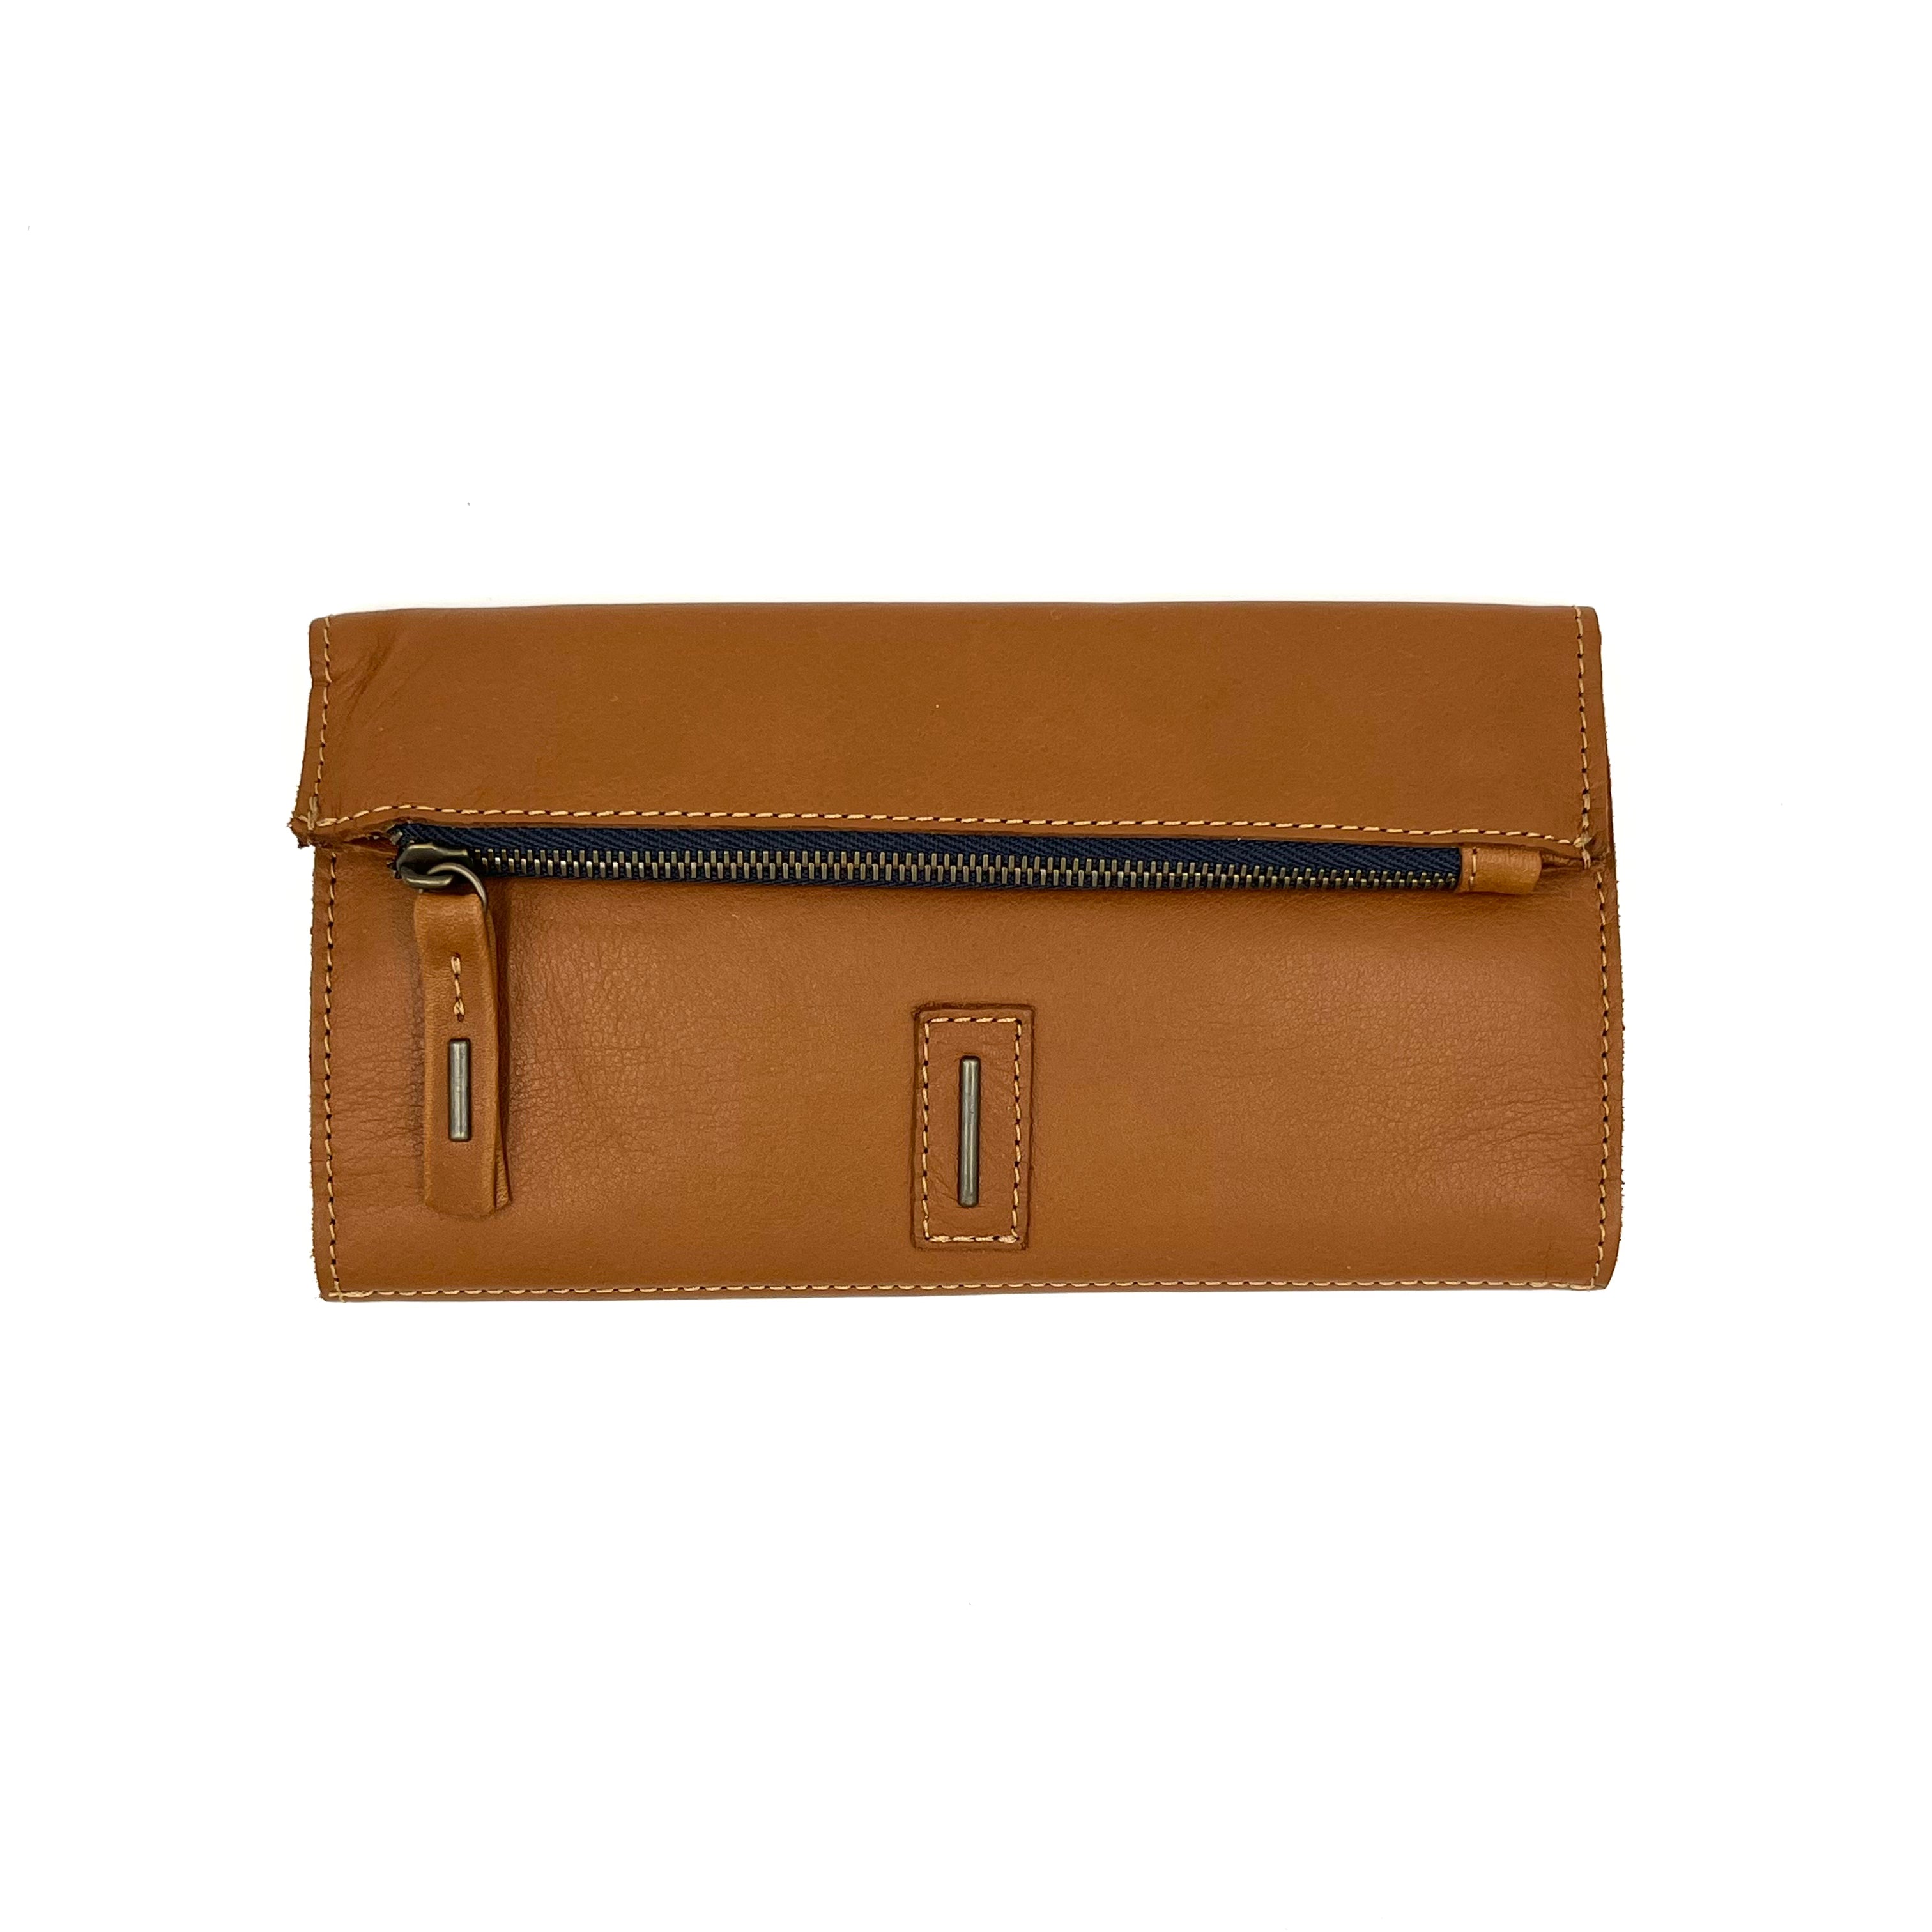 Max wallet mousse cuoio